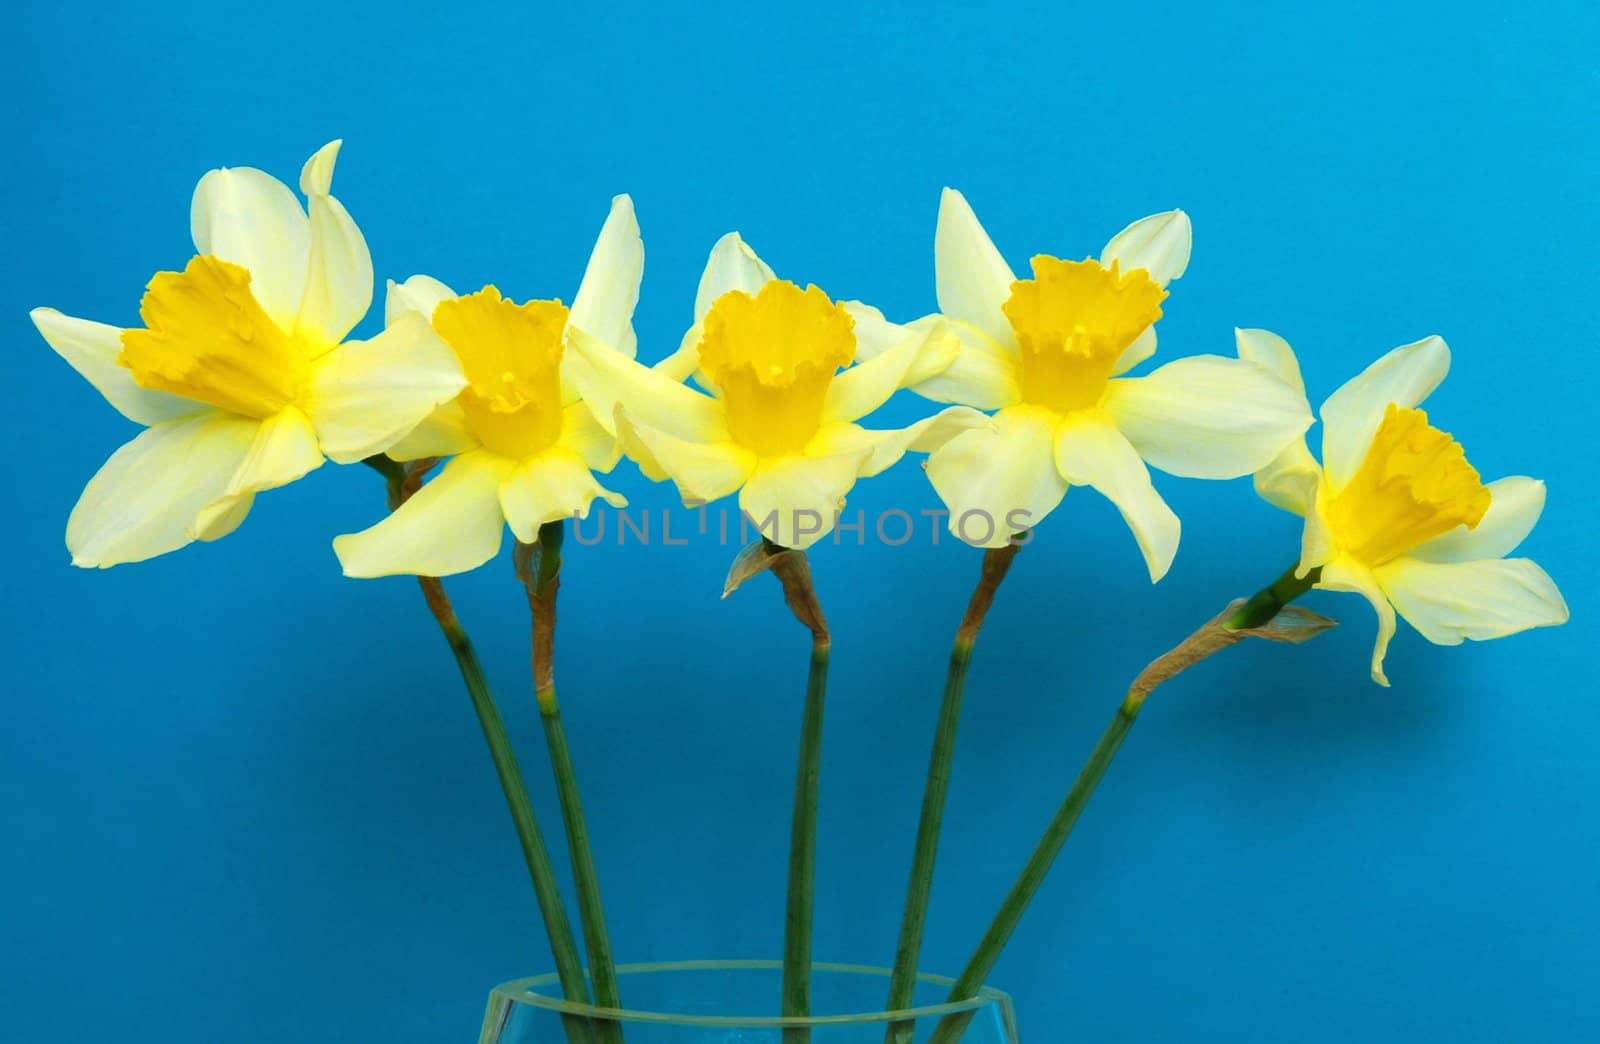 Spring jonquils on the blue background